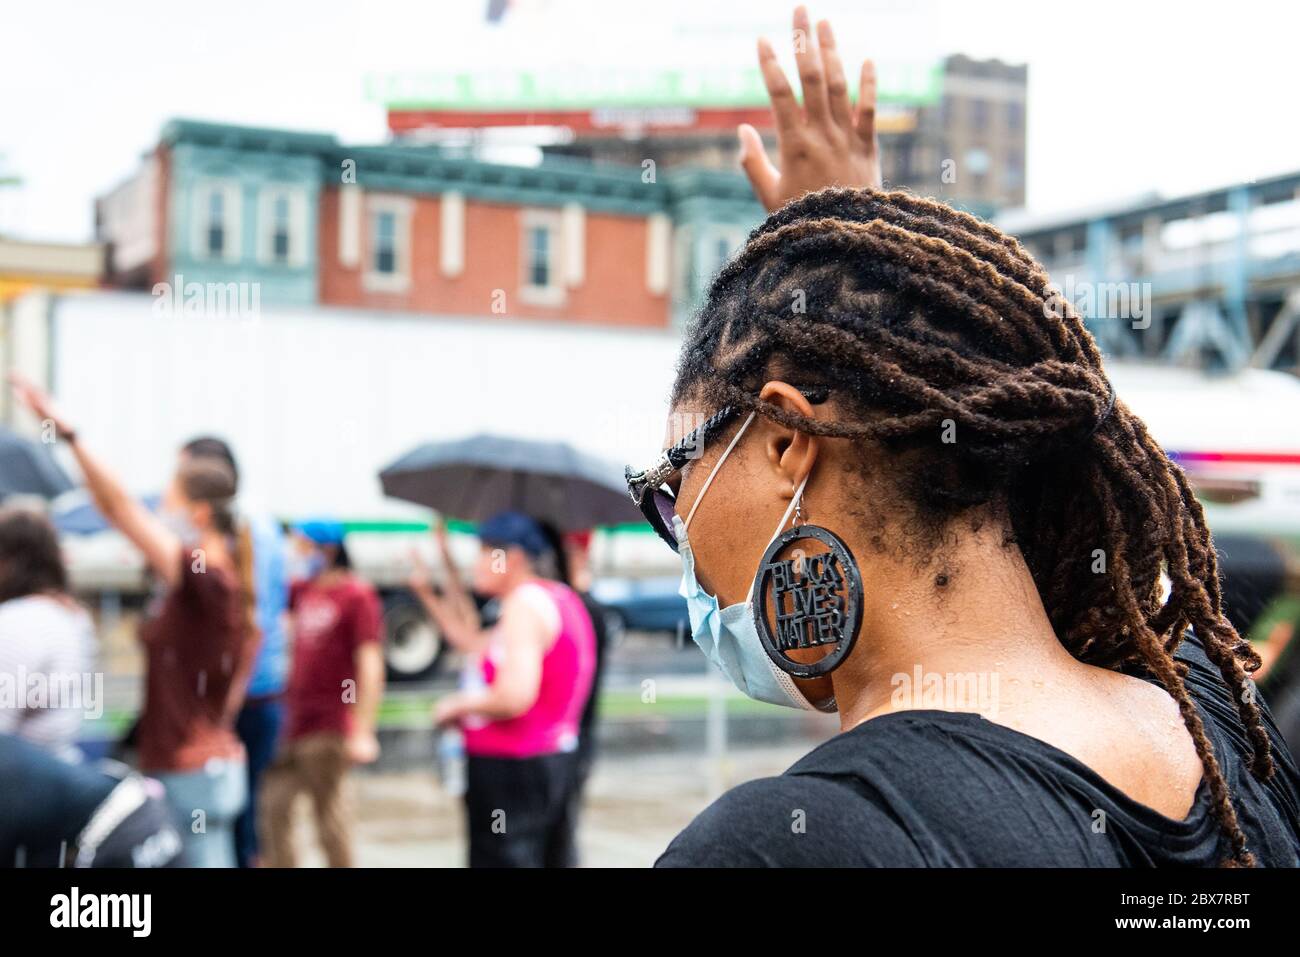 Philadelphia, PA / USA. About two dozen people gathered at the corner of Kensington and Allegheny Avenues for a prayer vigil for the city. Wearing masks and observing social distancing, participants taped faith-inspired words over their mouths. June 04 2020. Credit: Christopher Evens / Alamy Live News Stock Photo